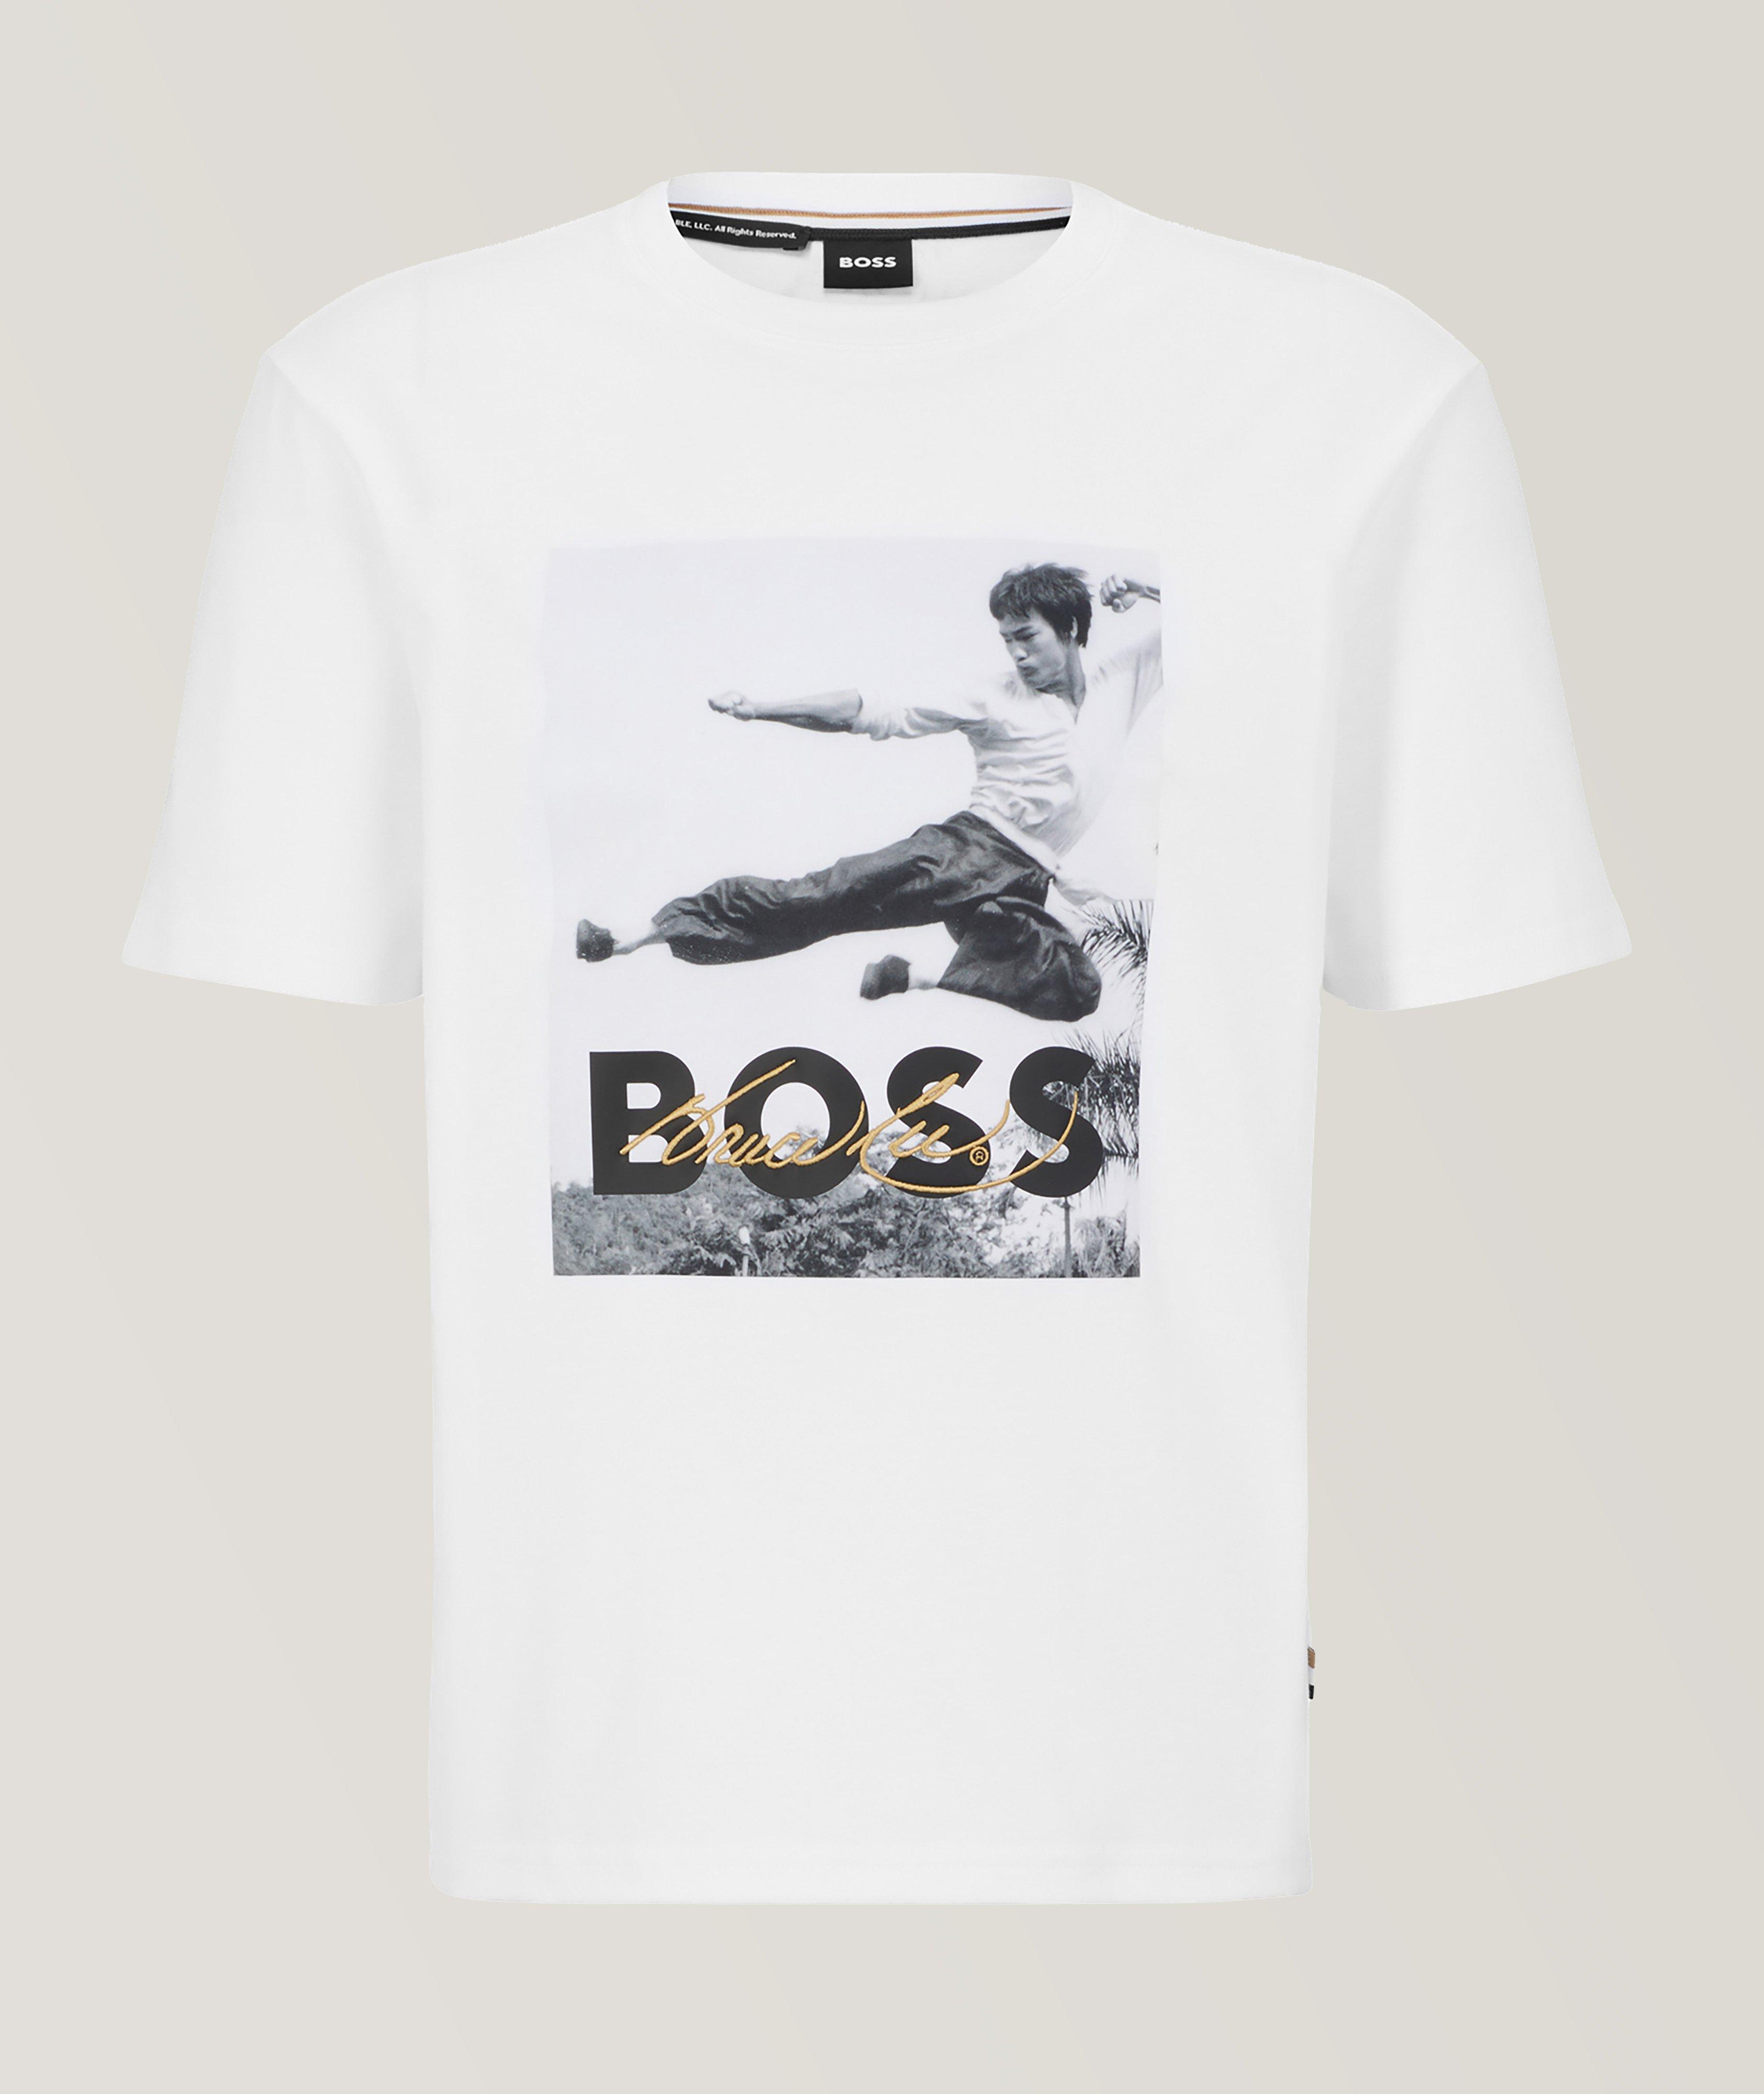 BOSS Legends Bruce Lee Collection Printed T-Shirt image 0